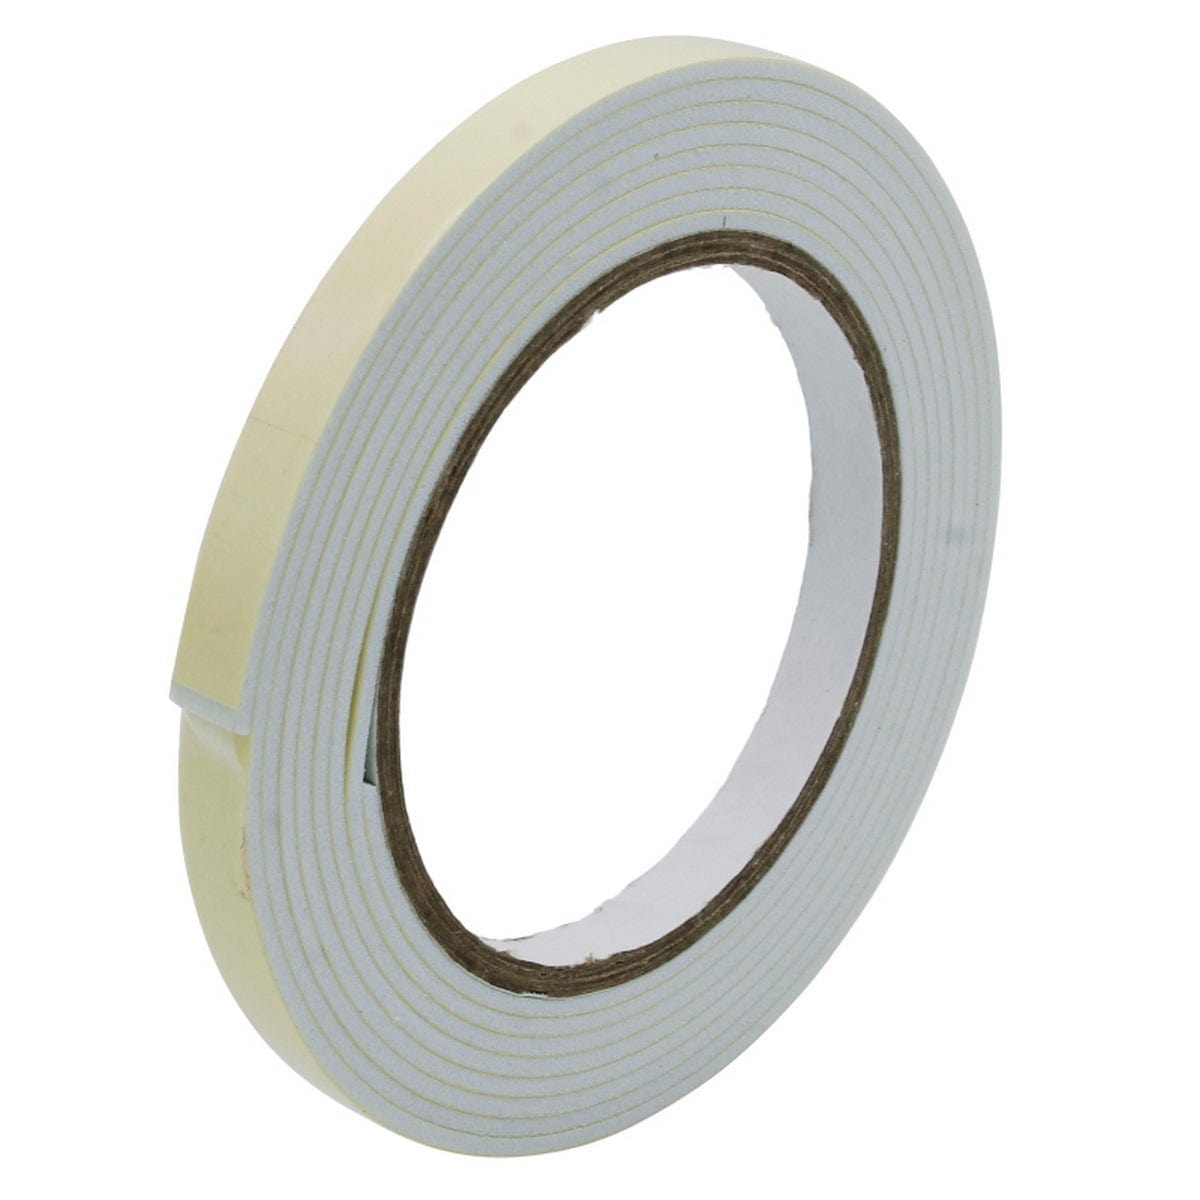 jags-mumbai Two way tape Two Way Tape, Double Sided Tape- 3/4 inches - Contain 1 Unit